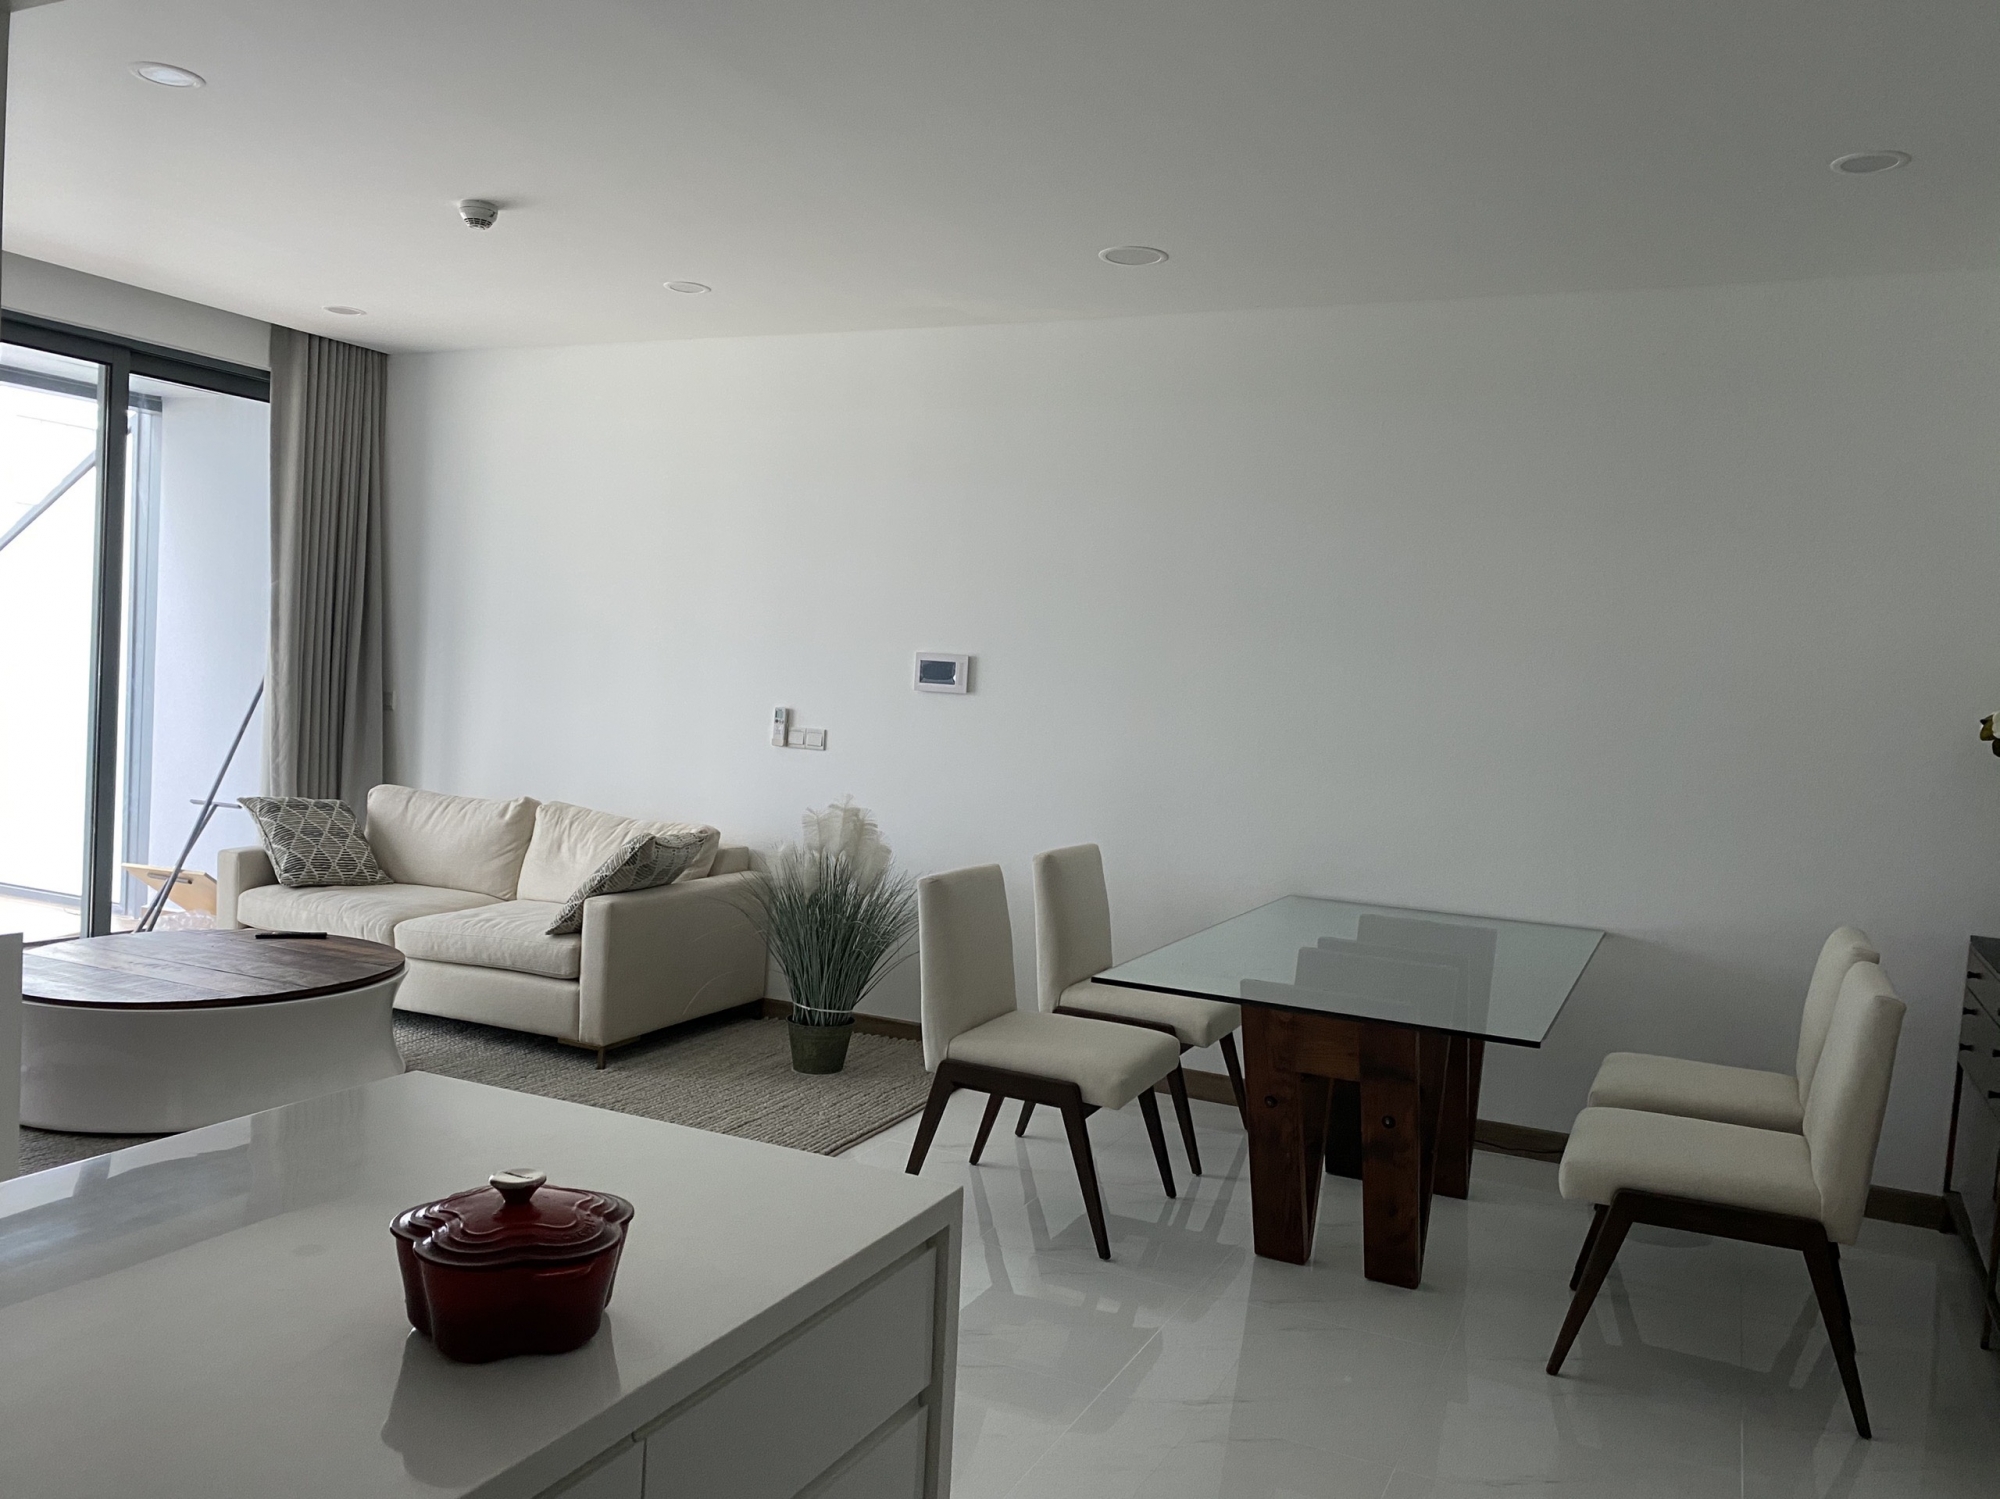 SUNWAH PEARL APARTMENT 2BRs FOR RENT WITH BASIC FURNITURE